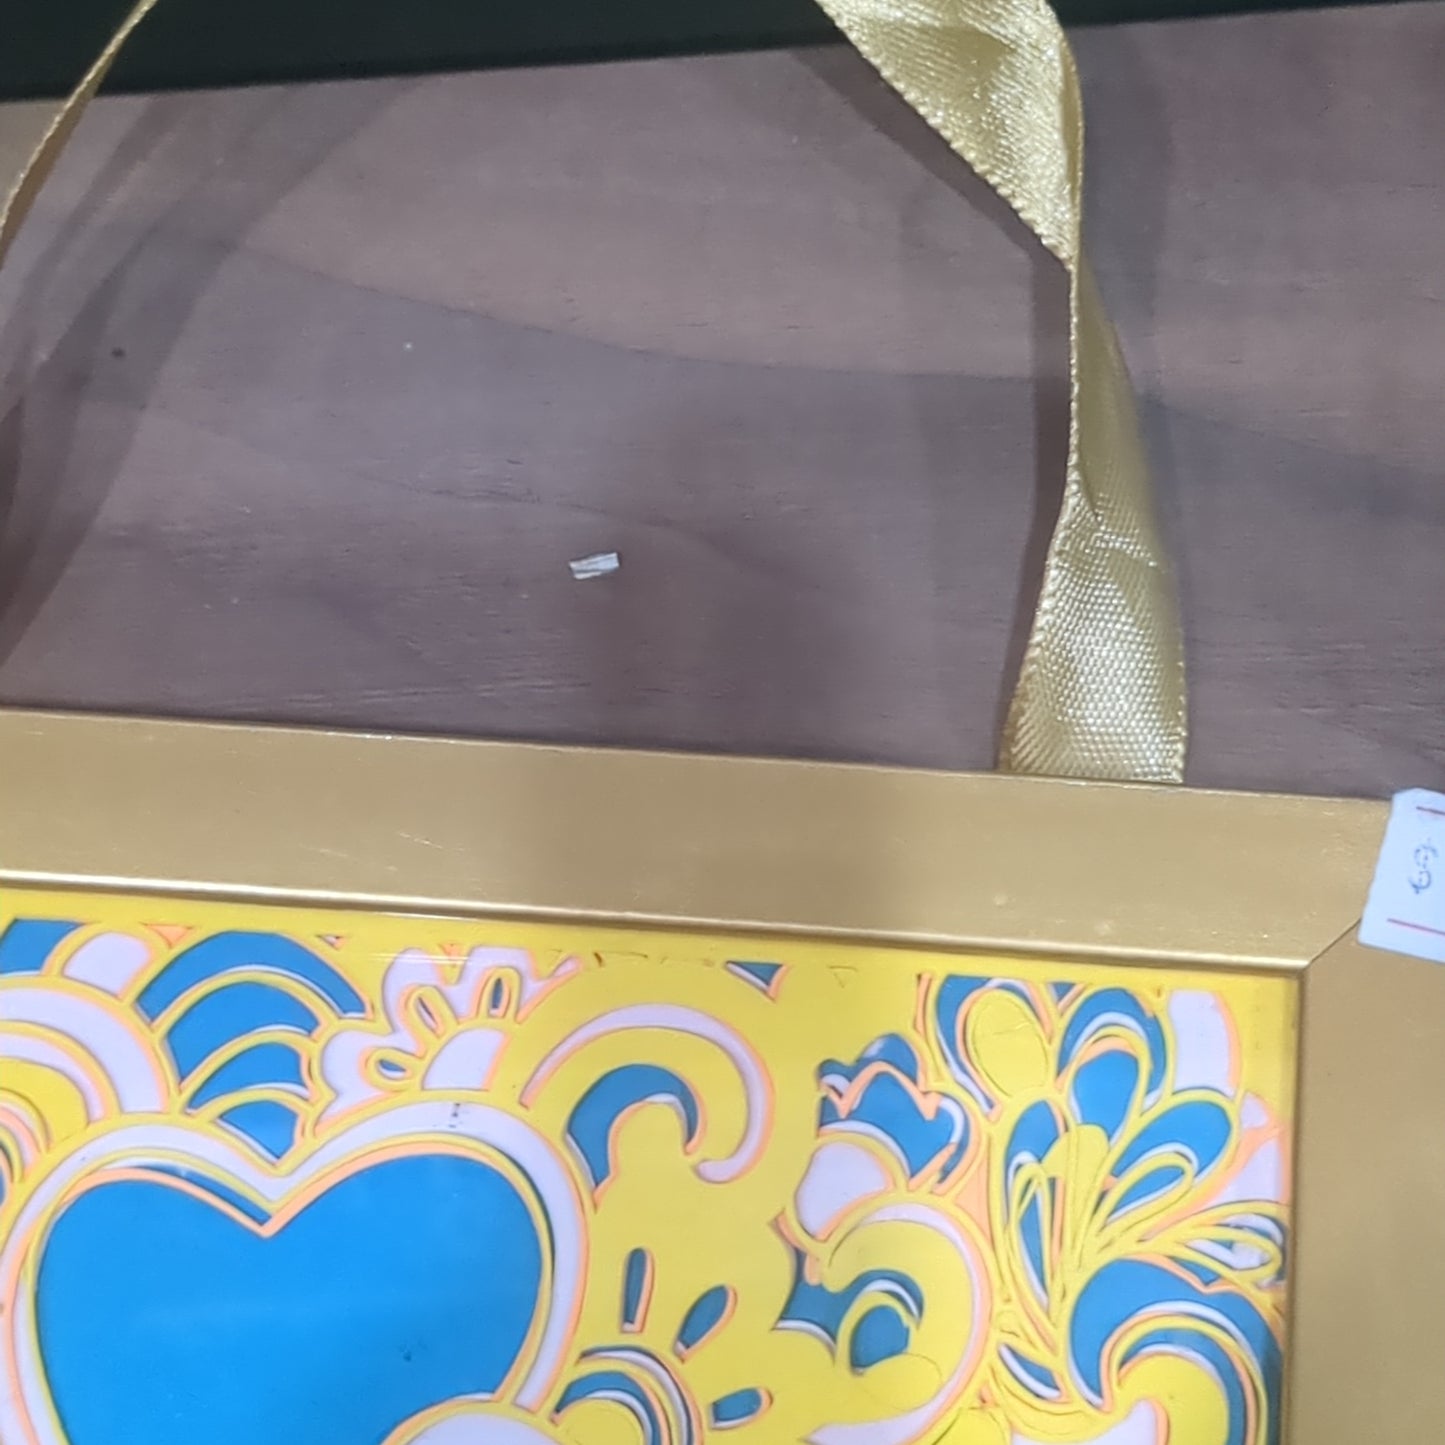 Roughly 5 x 6” gold shadowbox with paper cut Paisley heart